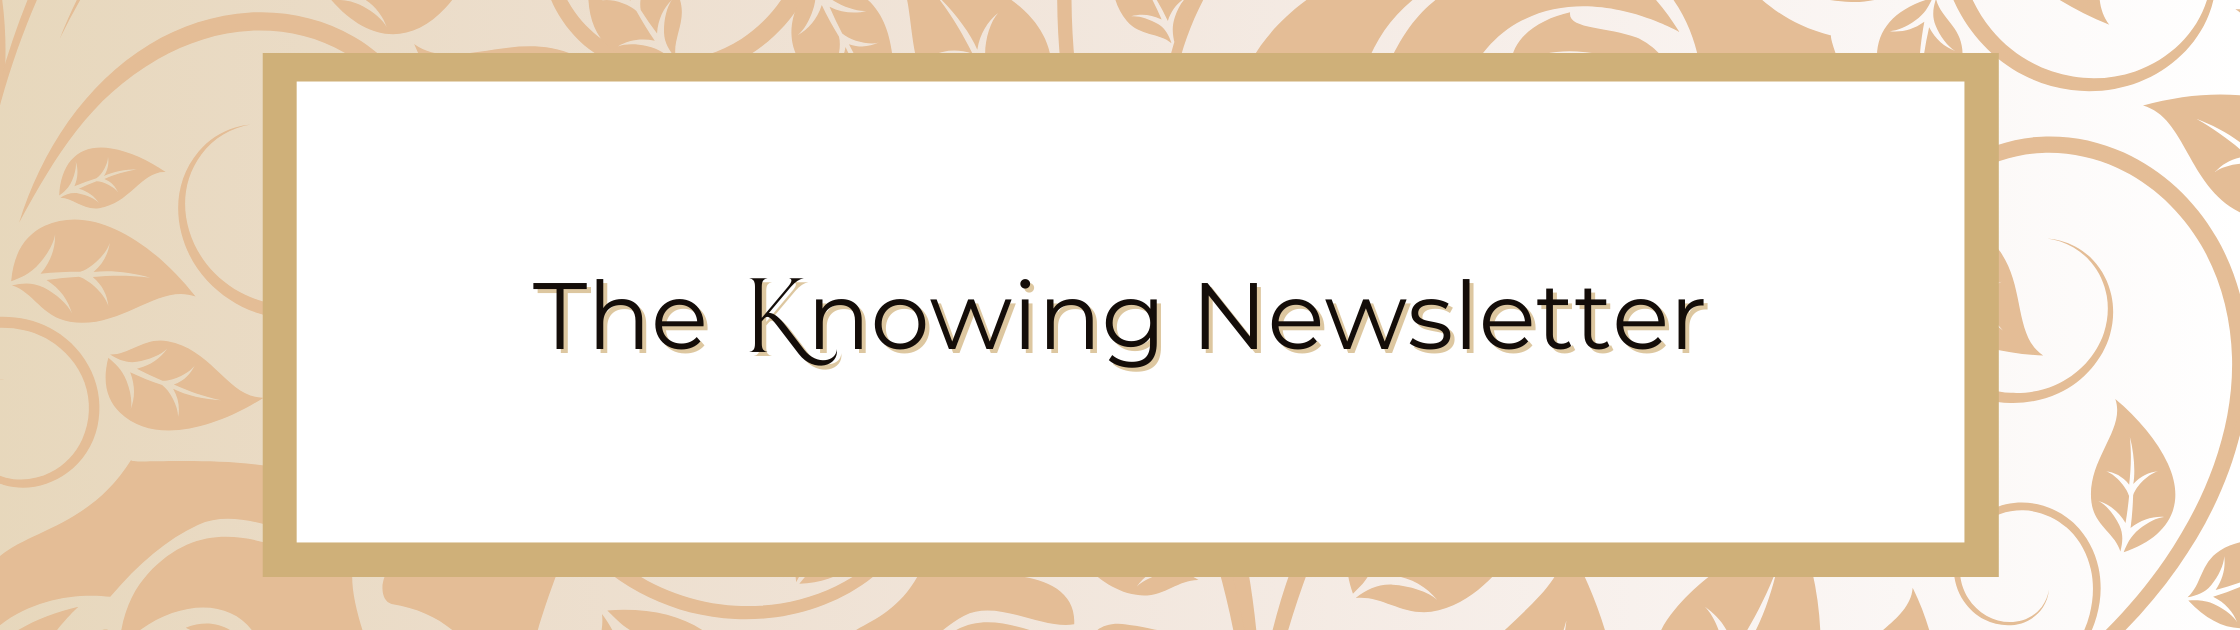 Announcement - The Knowing Newsletter